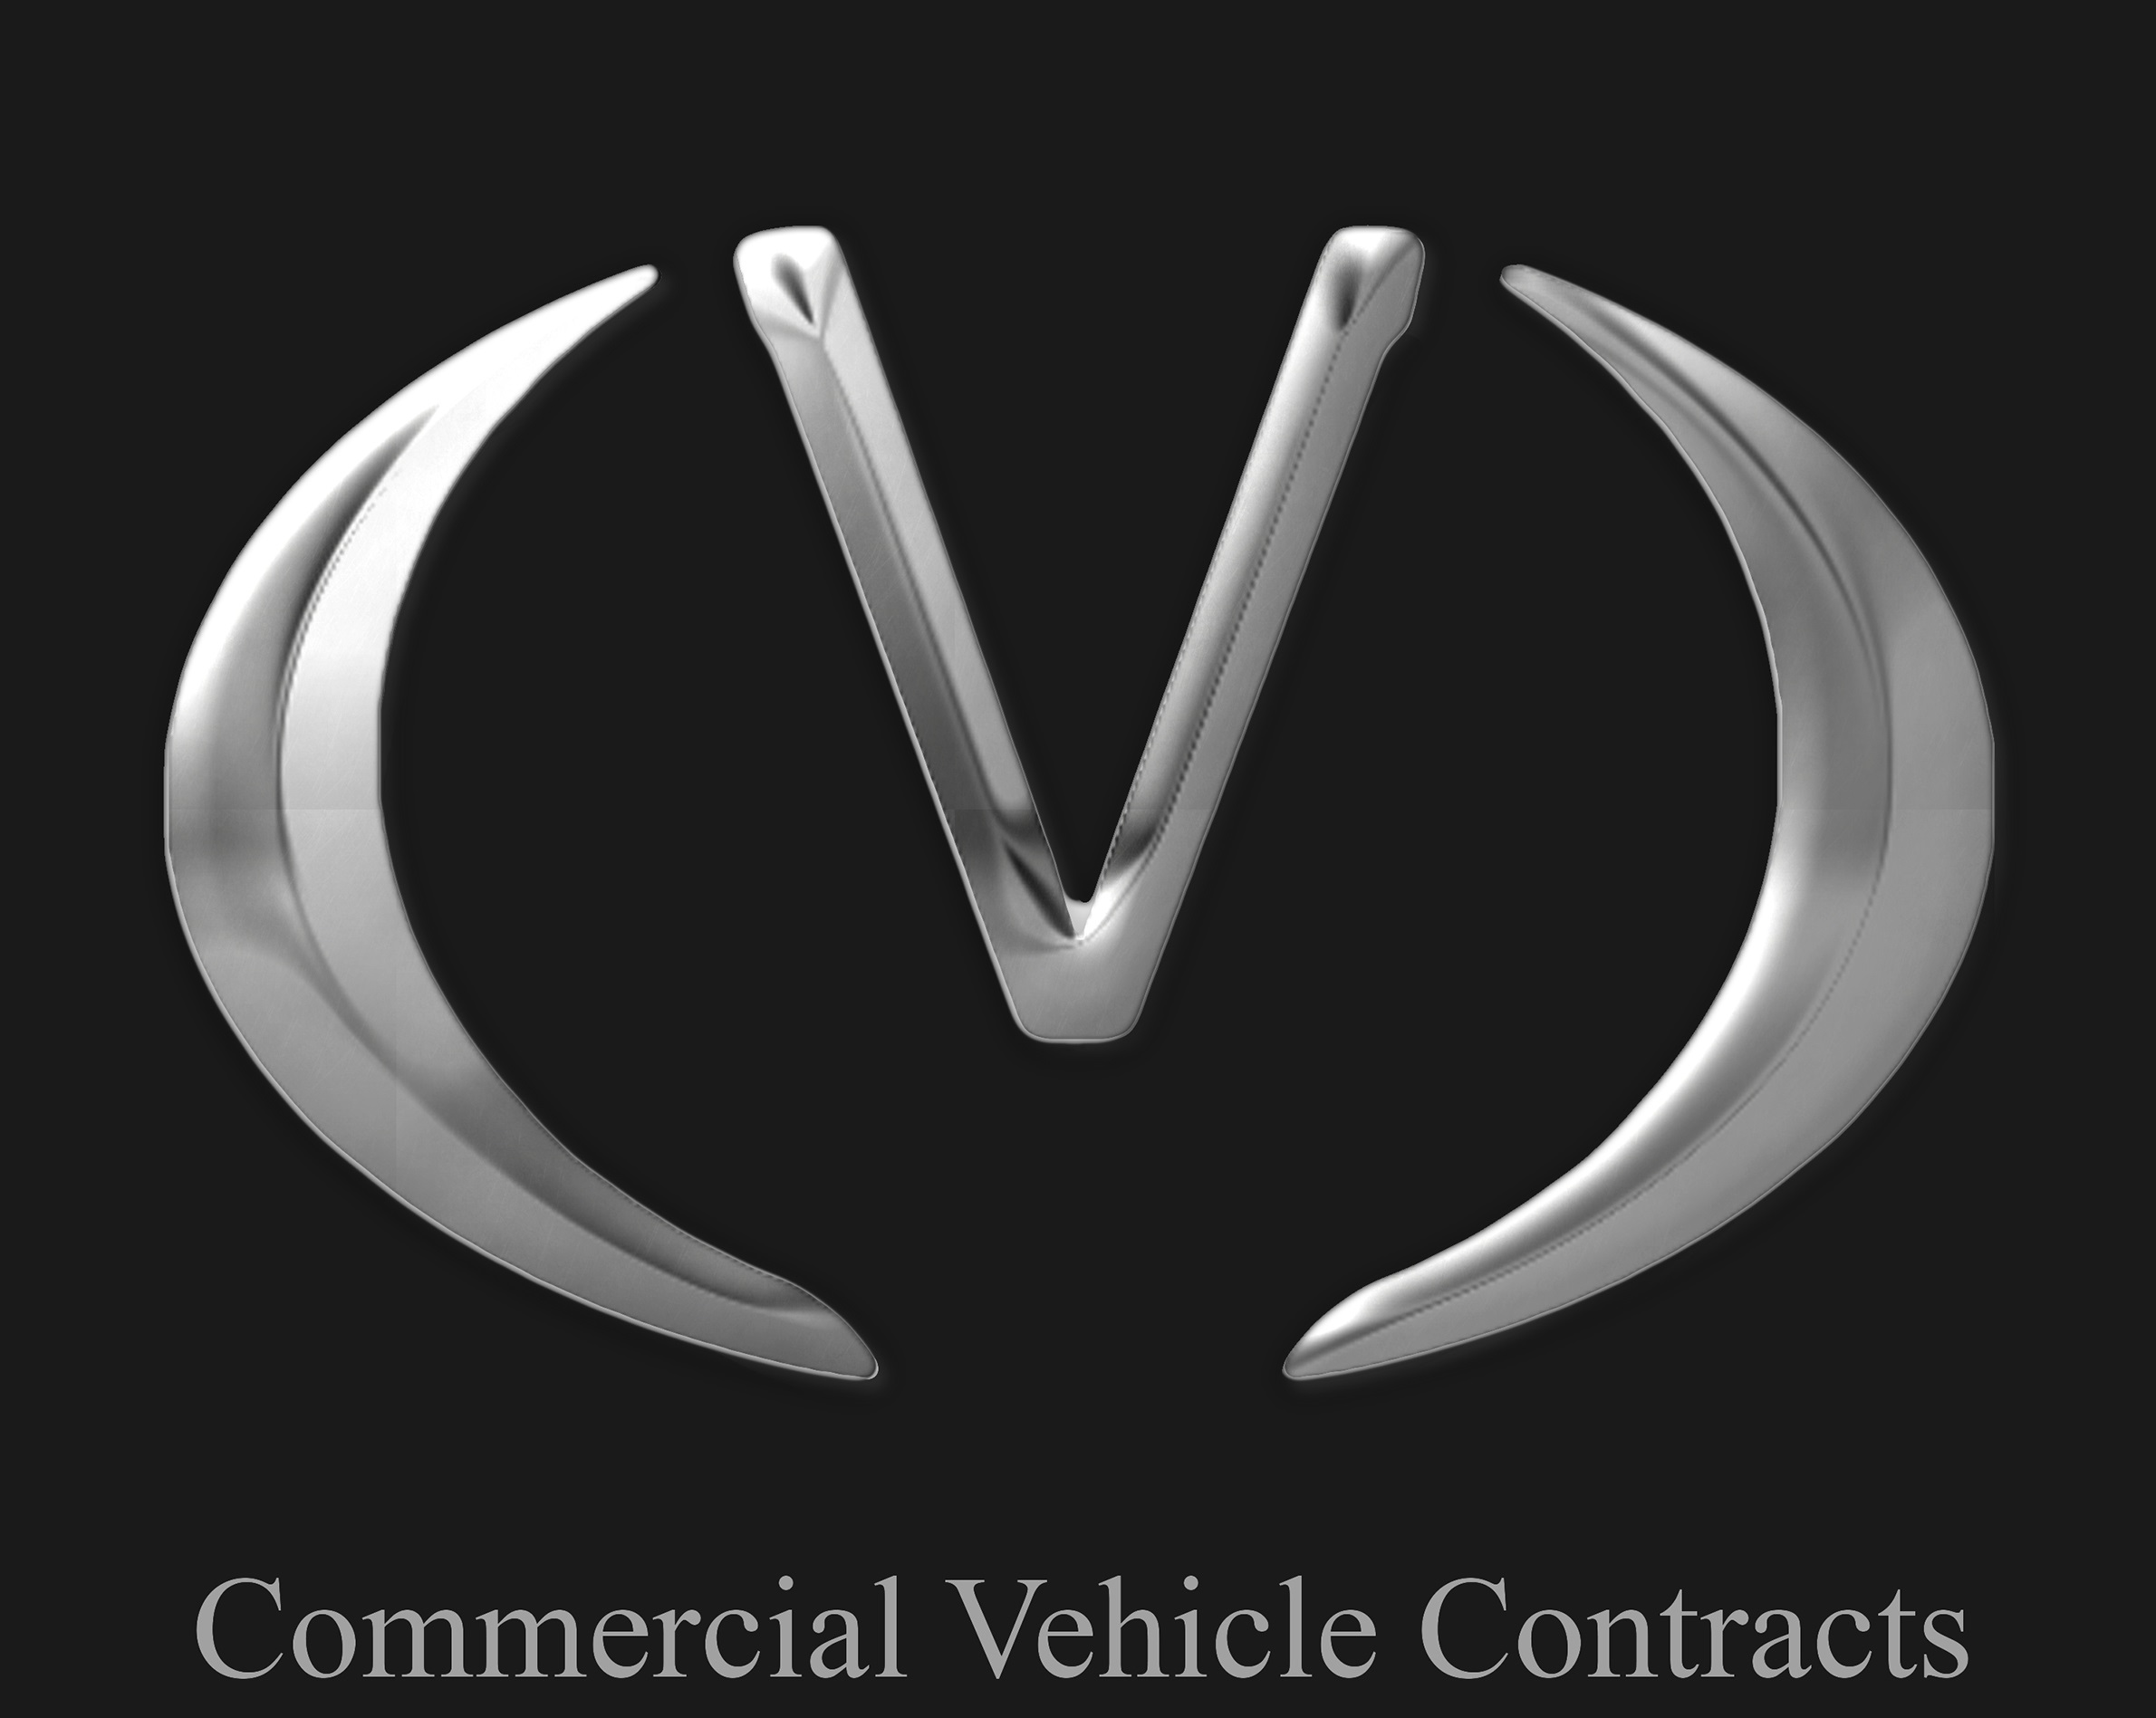 Commercial Vehicle Contracts Ltd